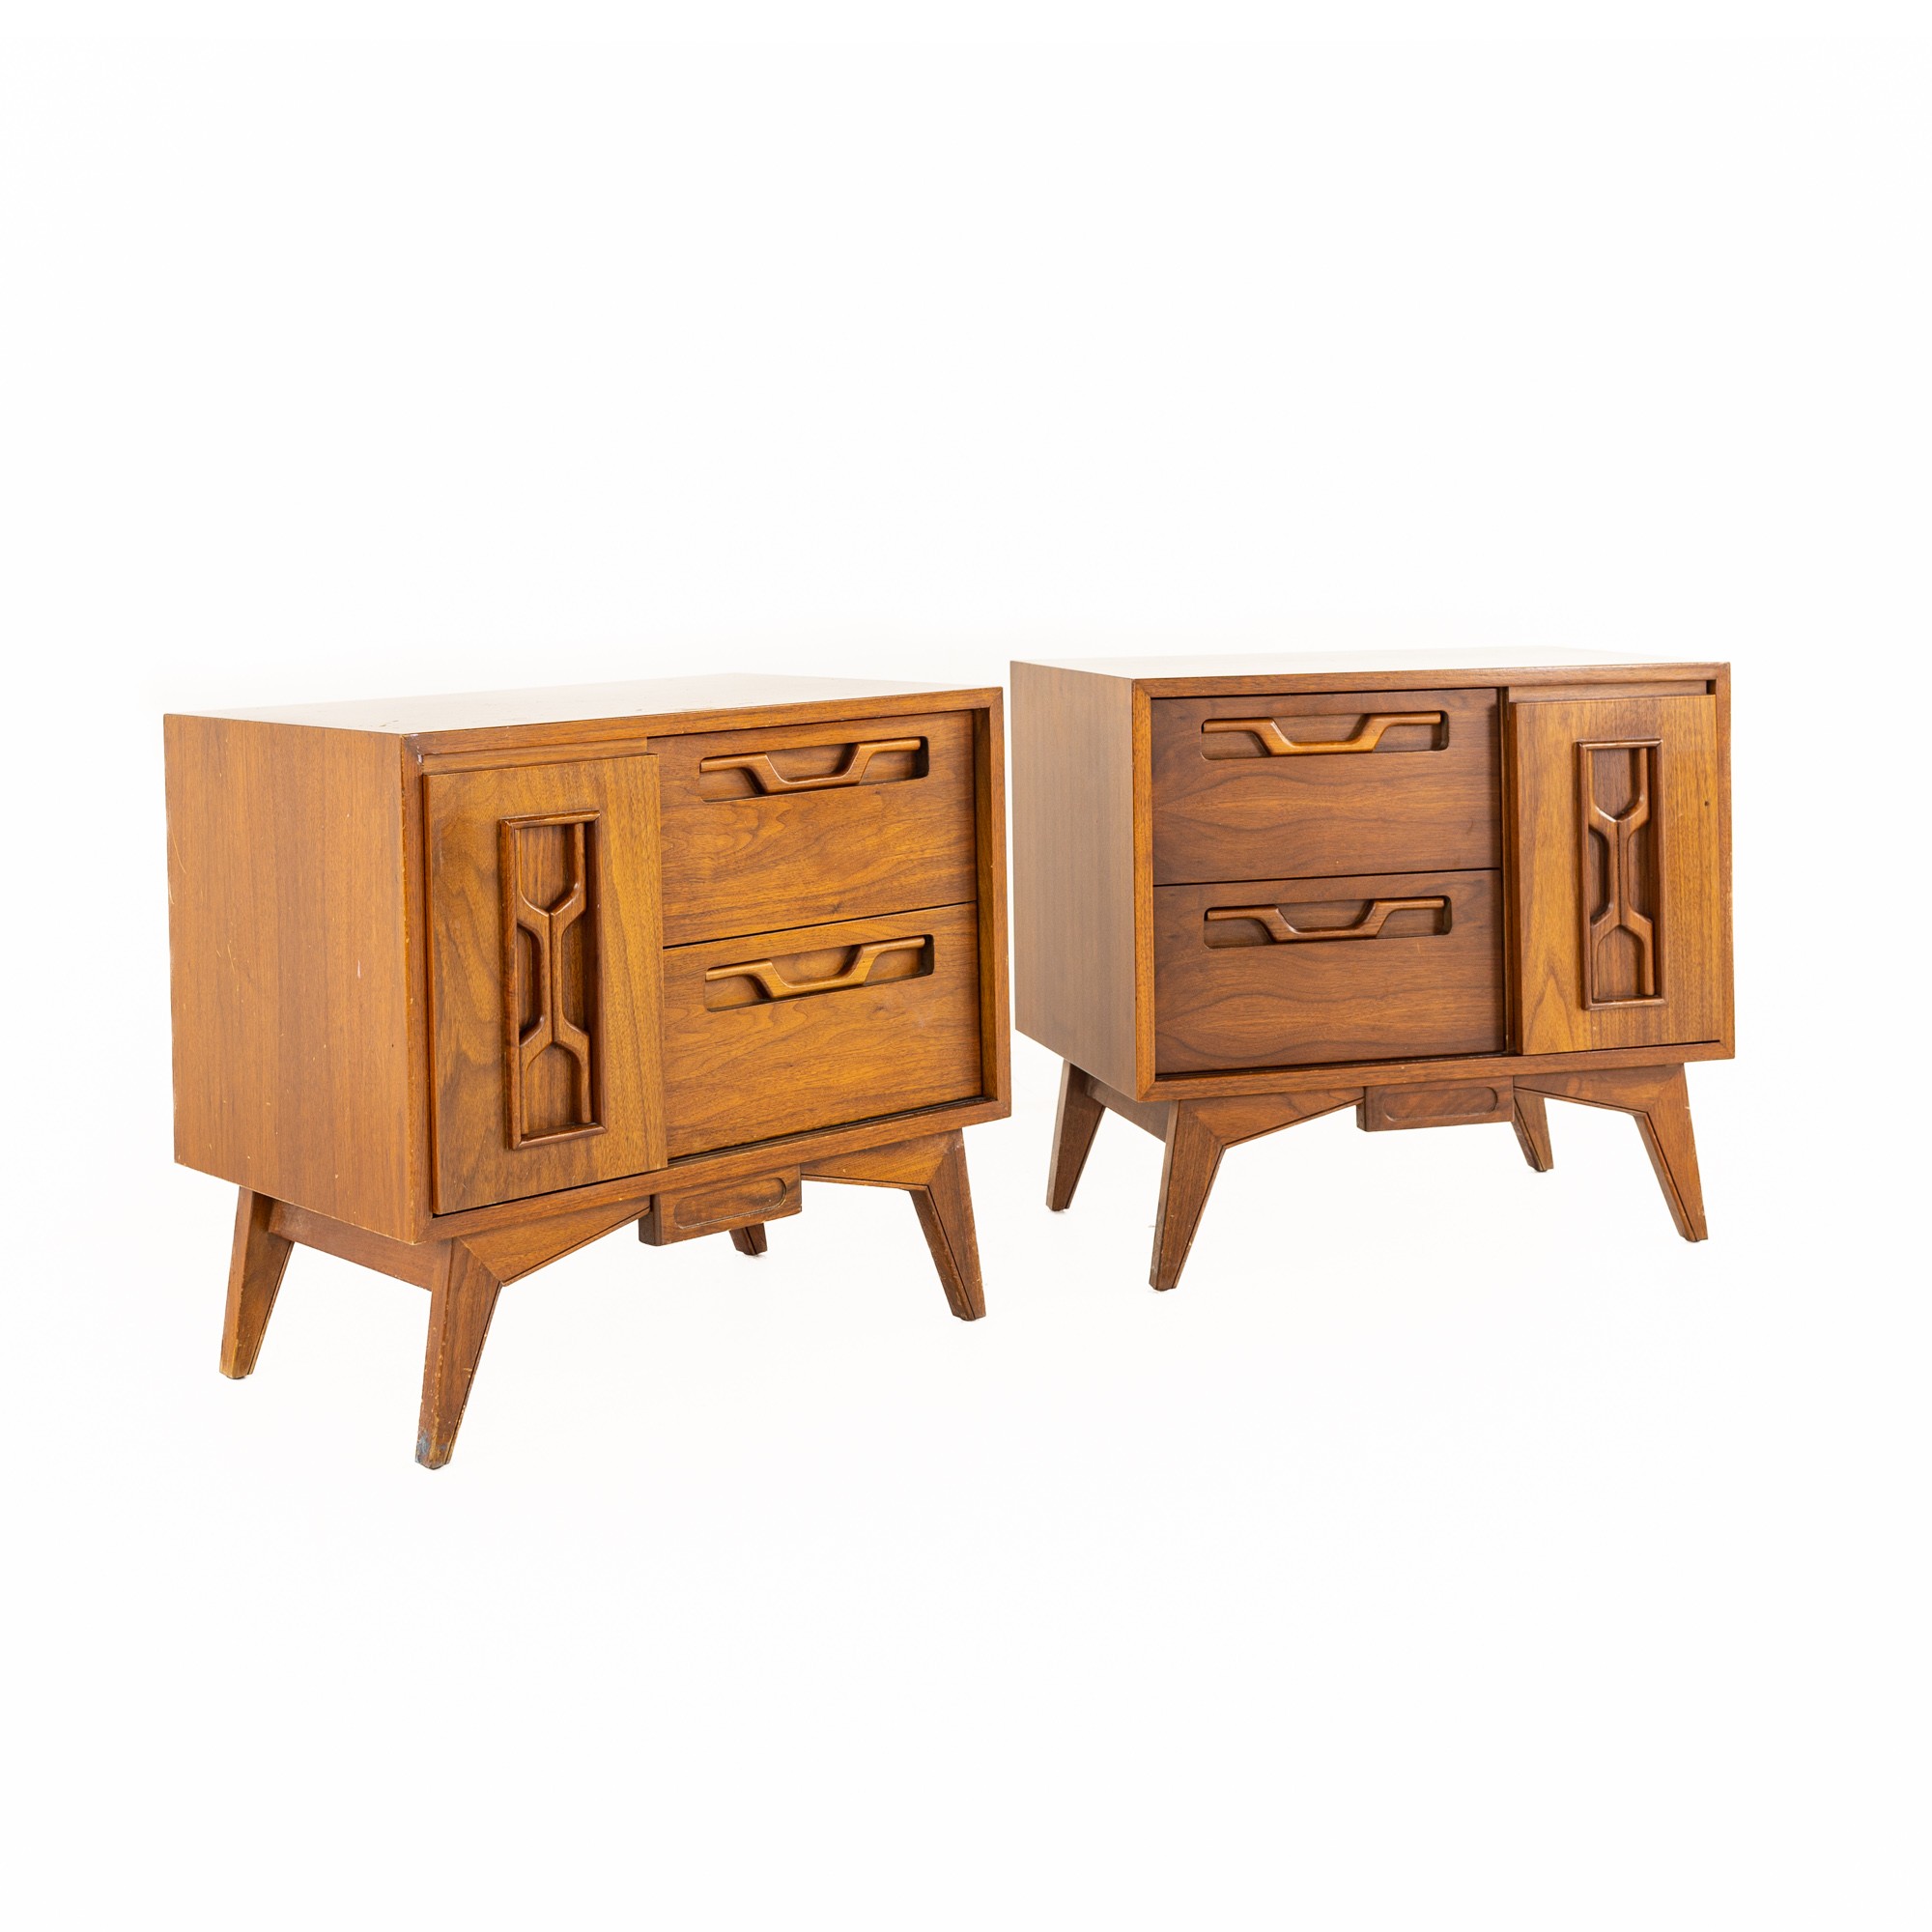 Young Manufacturing Style Mid Century Walnut Nightstands - Set of 2